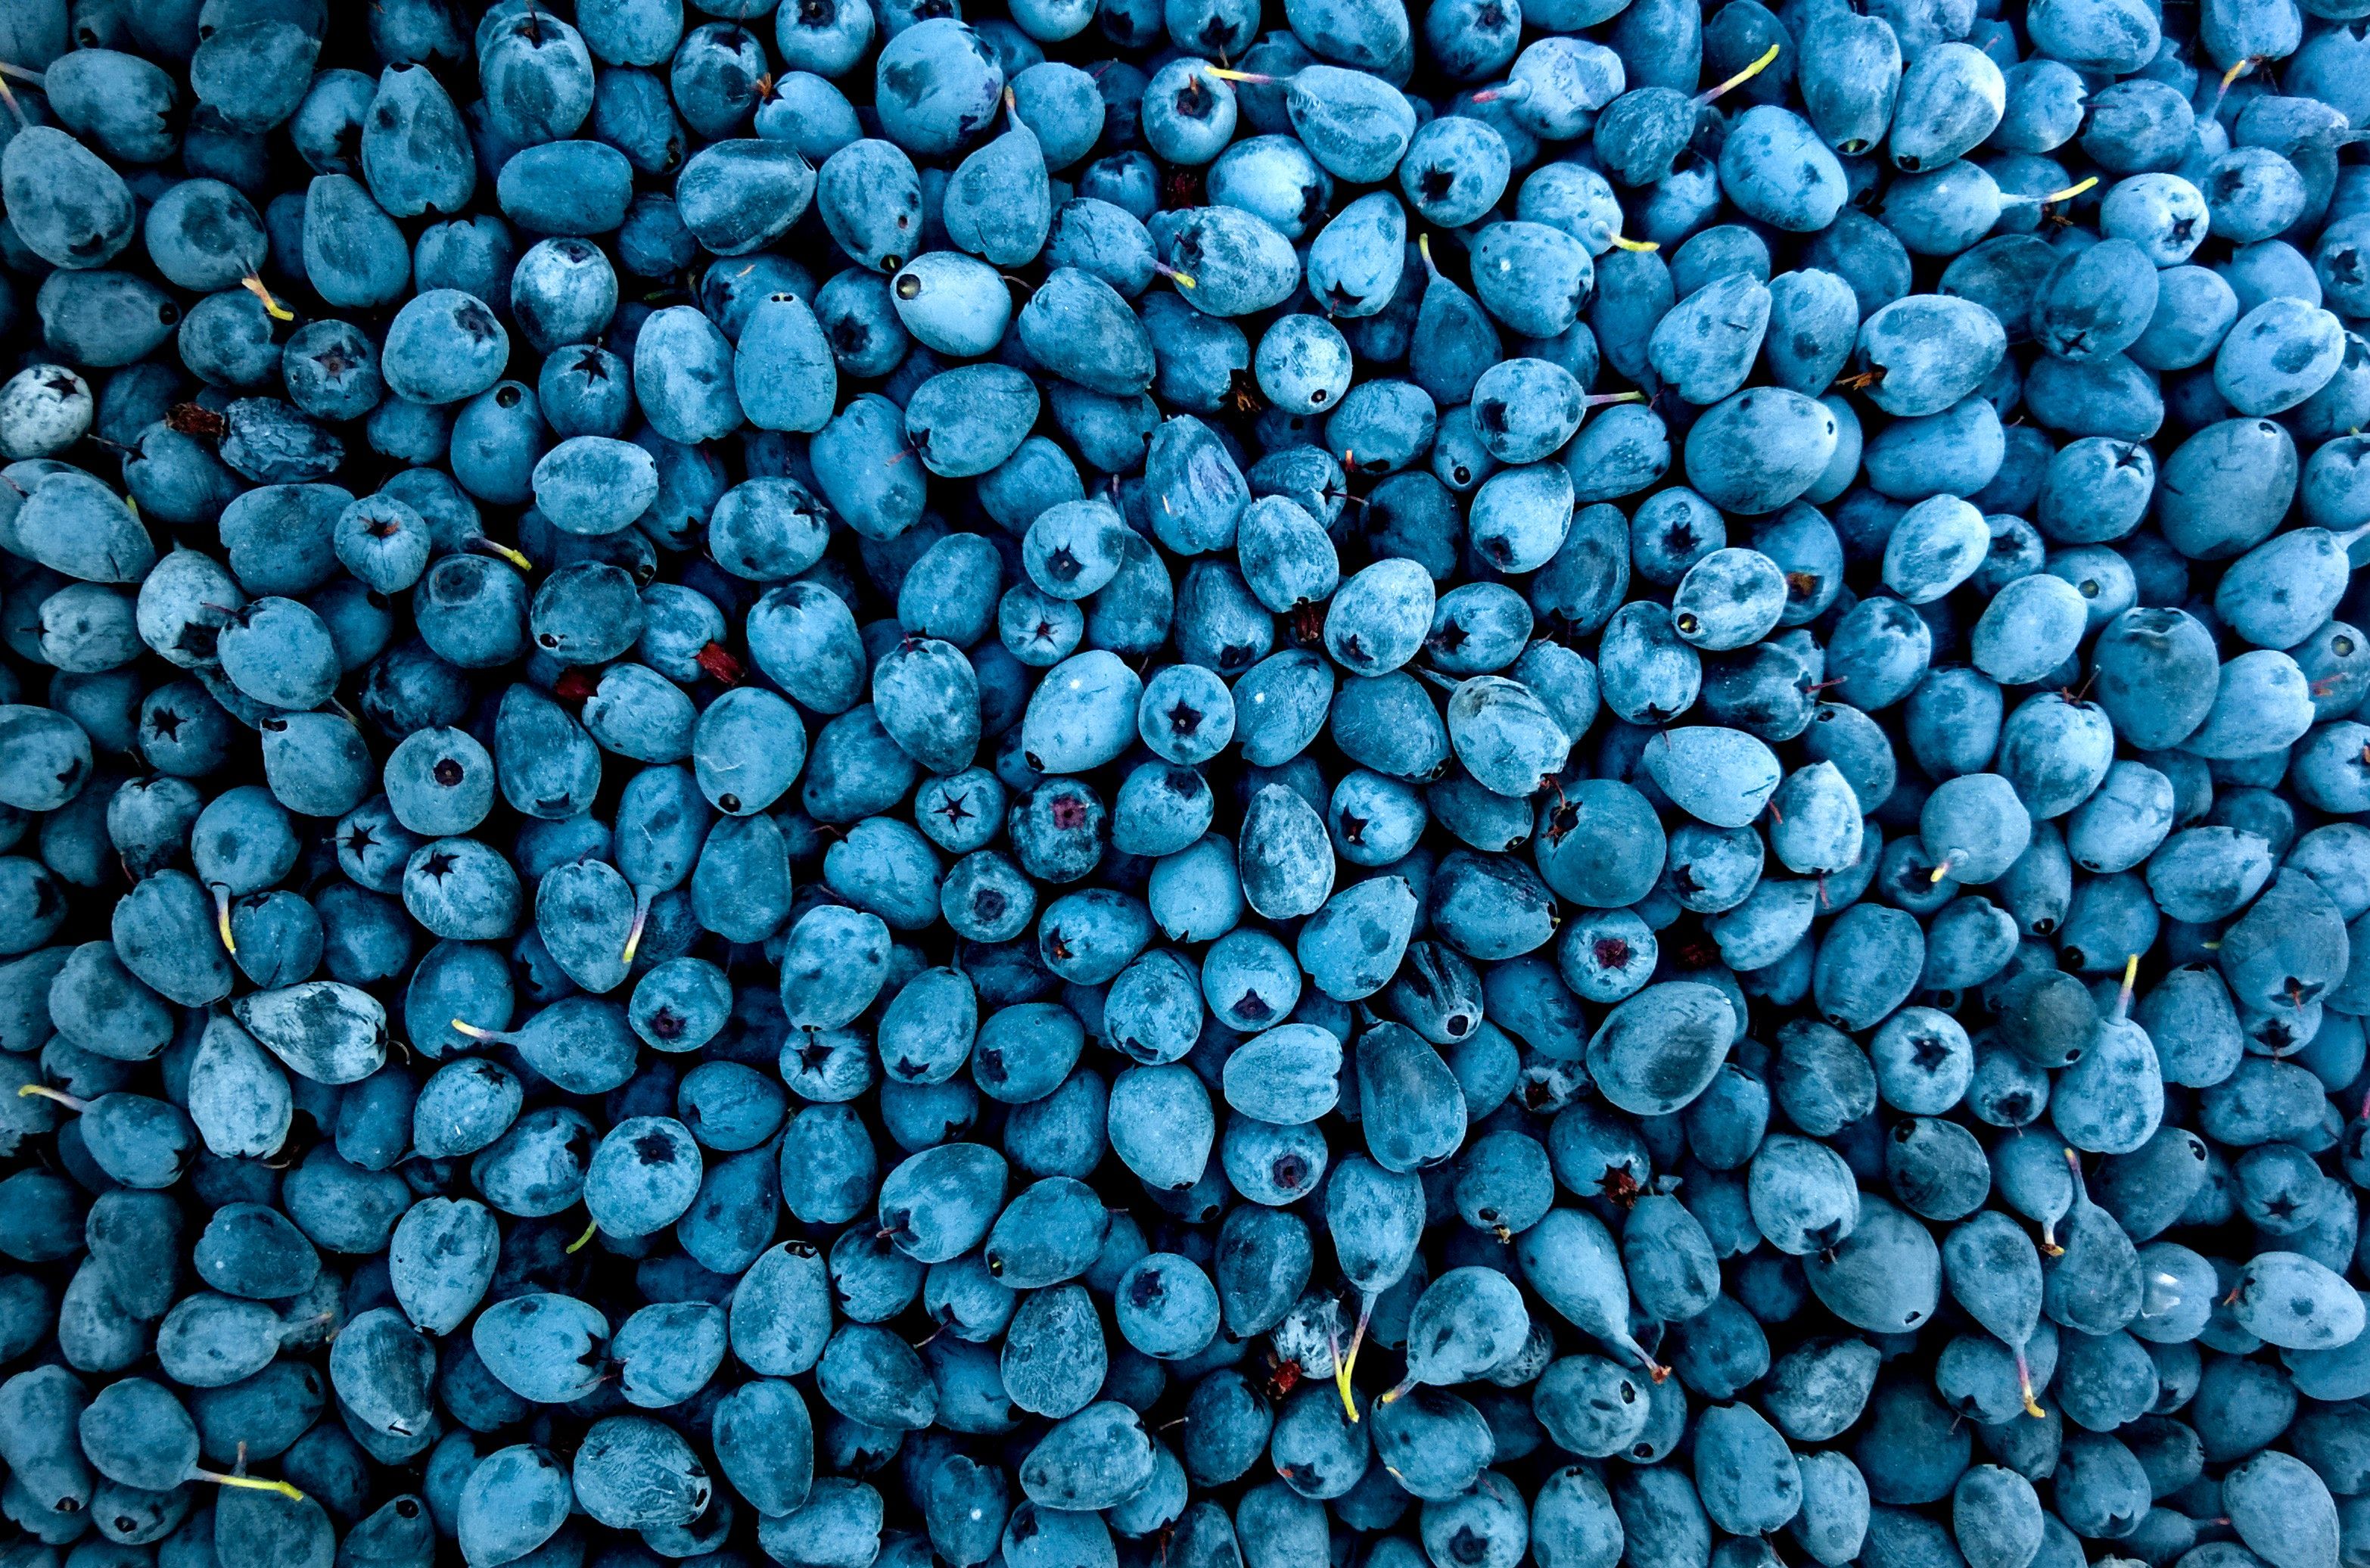 Cute Blueberry Wallpapers